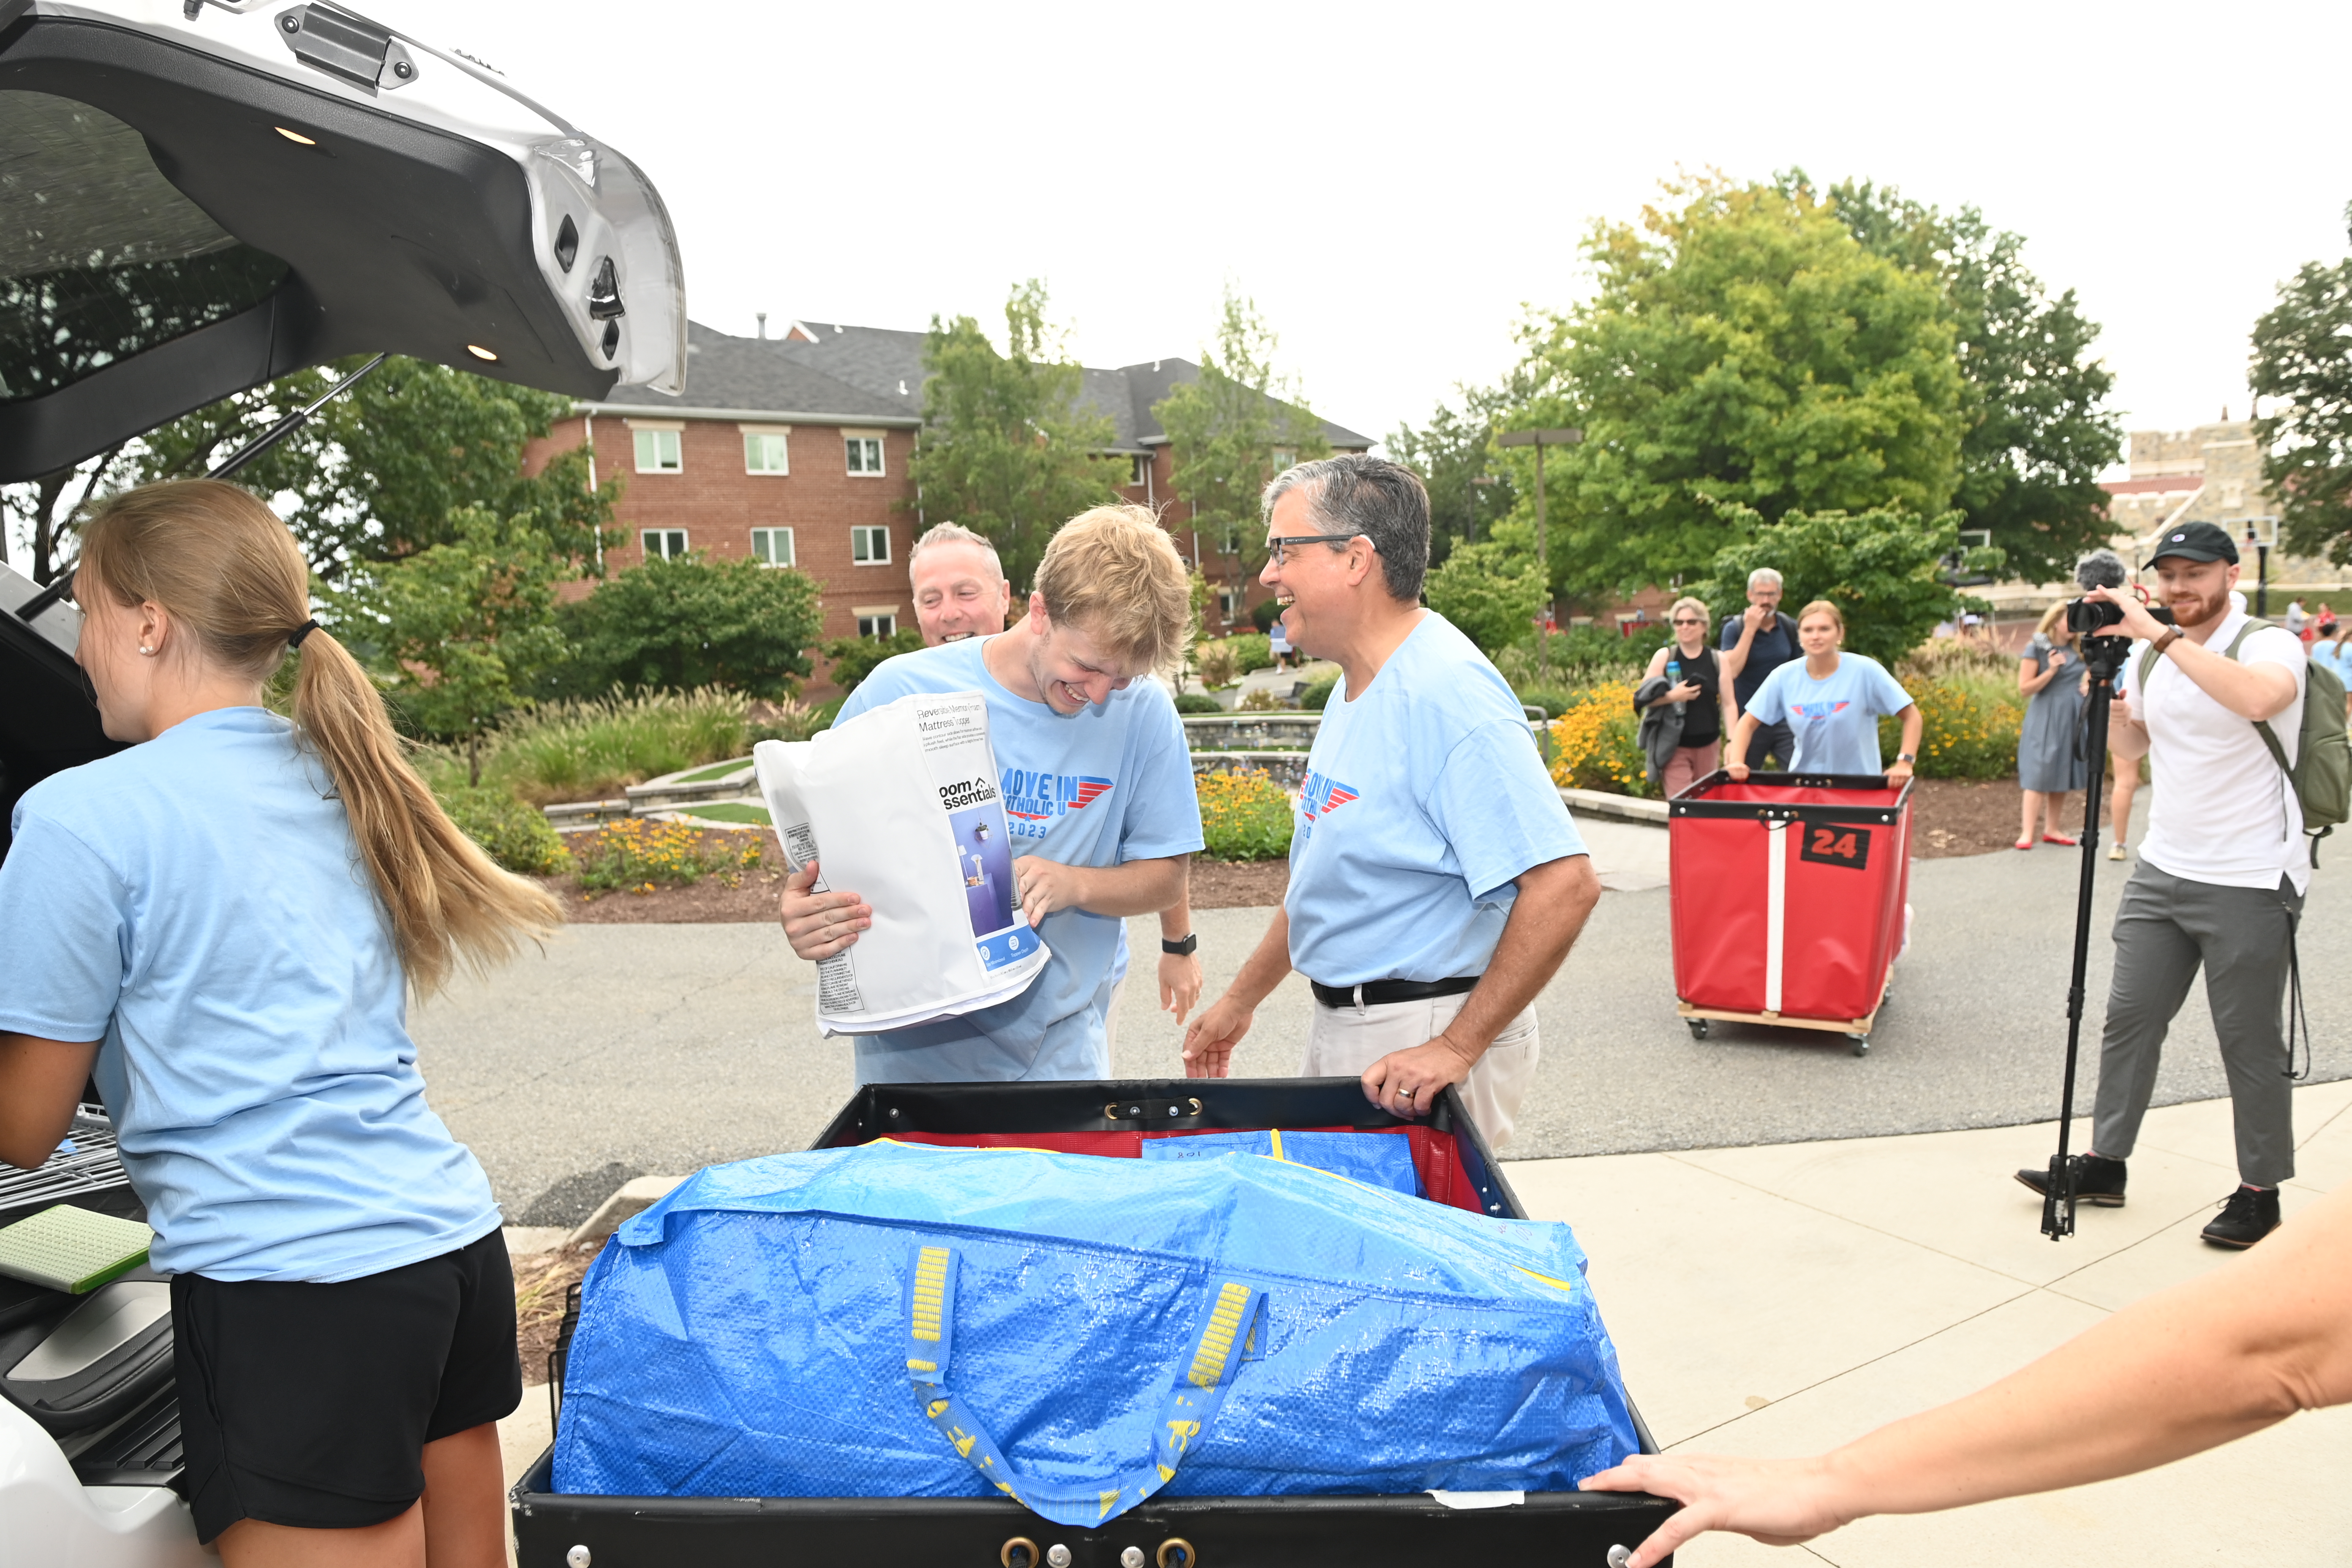 President Kilpatrick and student volunteer helping move in new students